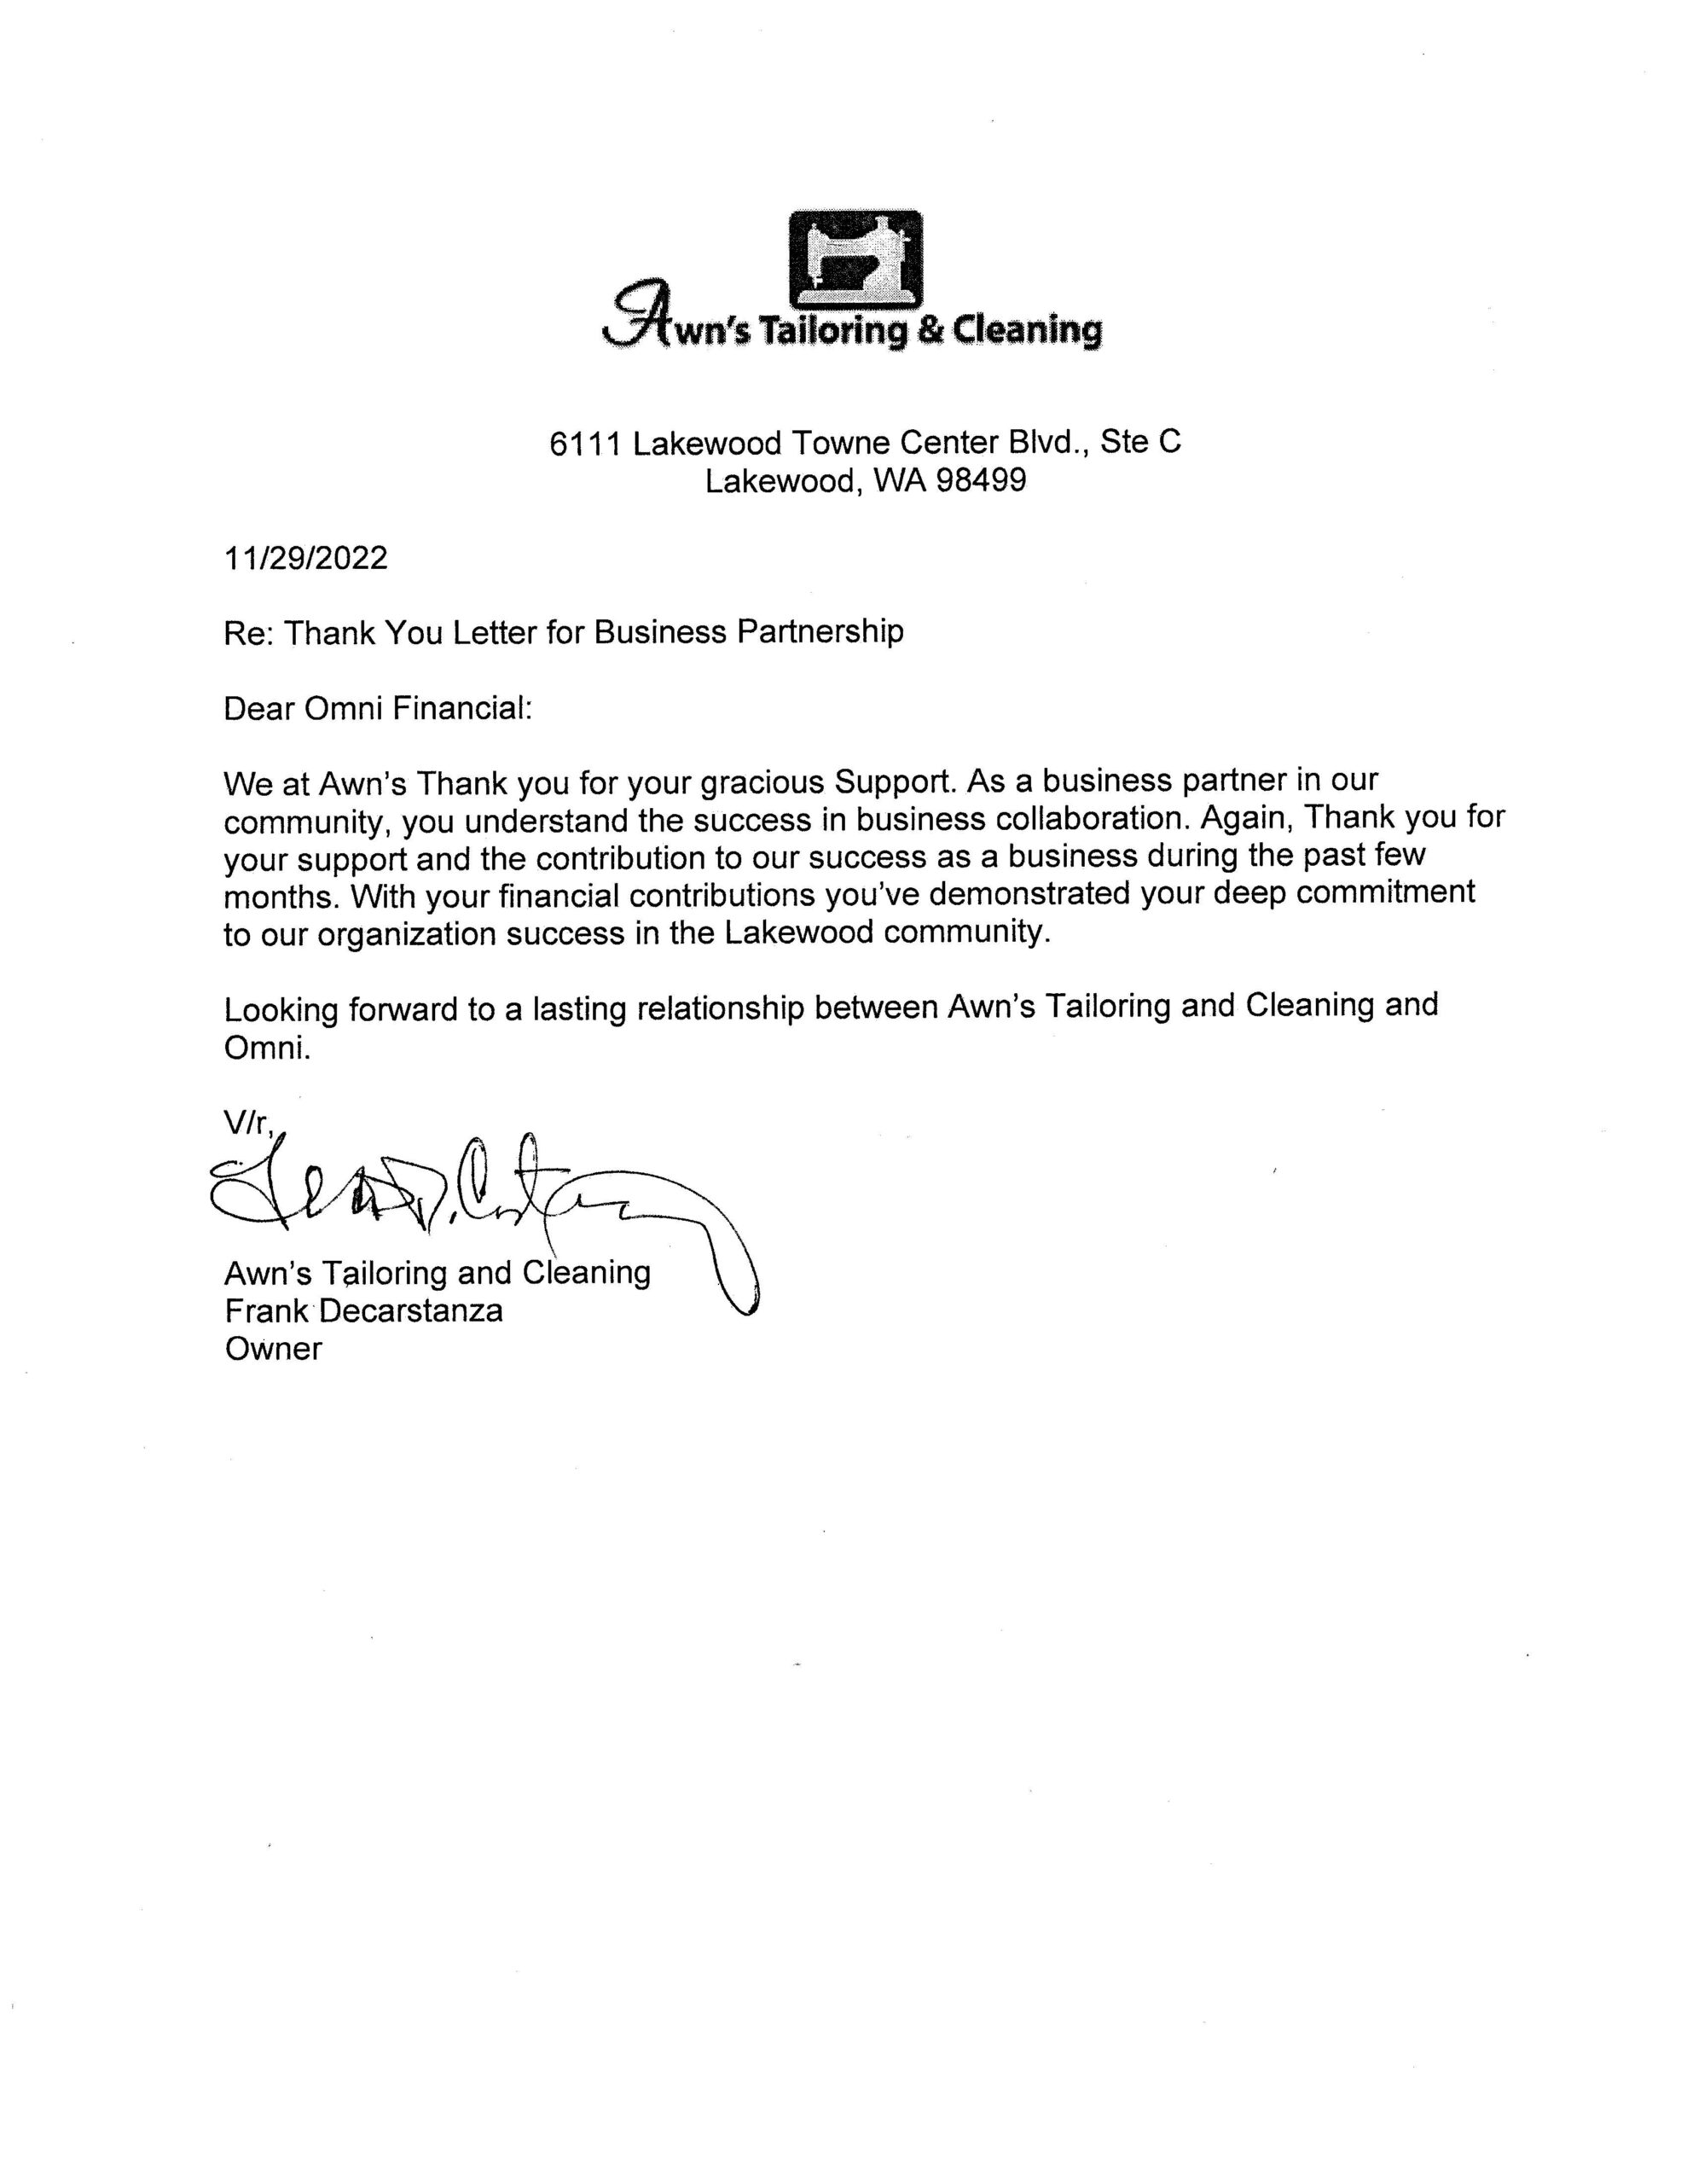 Awn’s Tailoring & Cleaning Thank You Letter